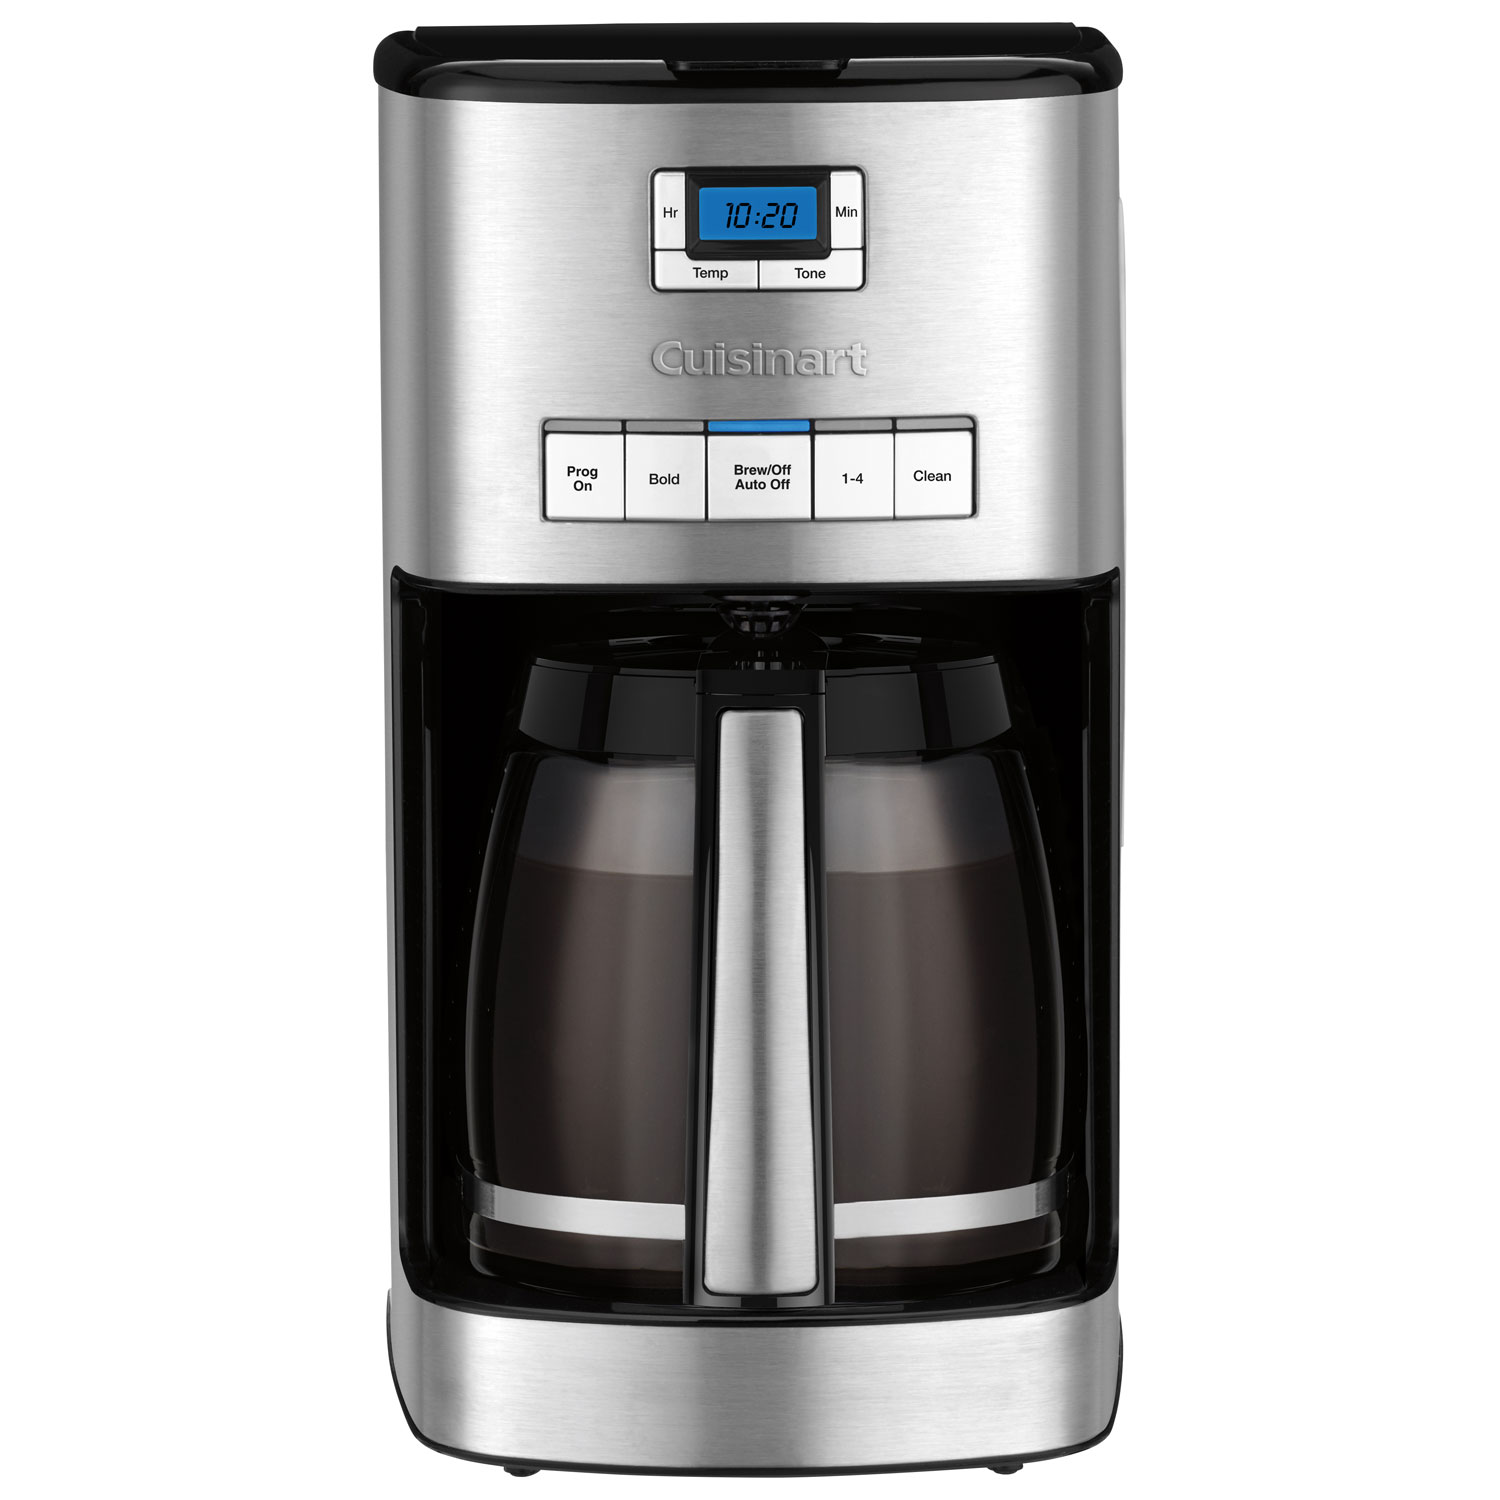 Cuisinart PerfecTemp Programmable Drip Coffee Maker - 14-Cup - Stainless Steel - Only at Best Buy